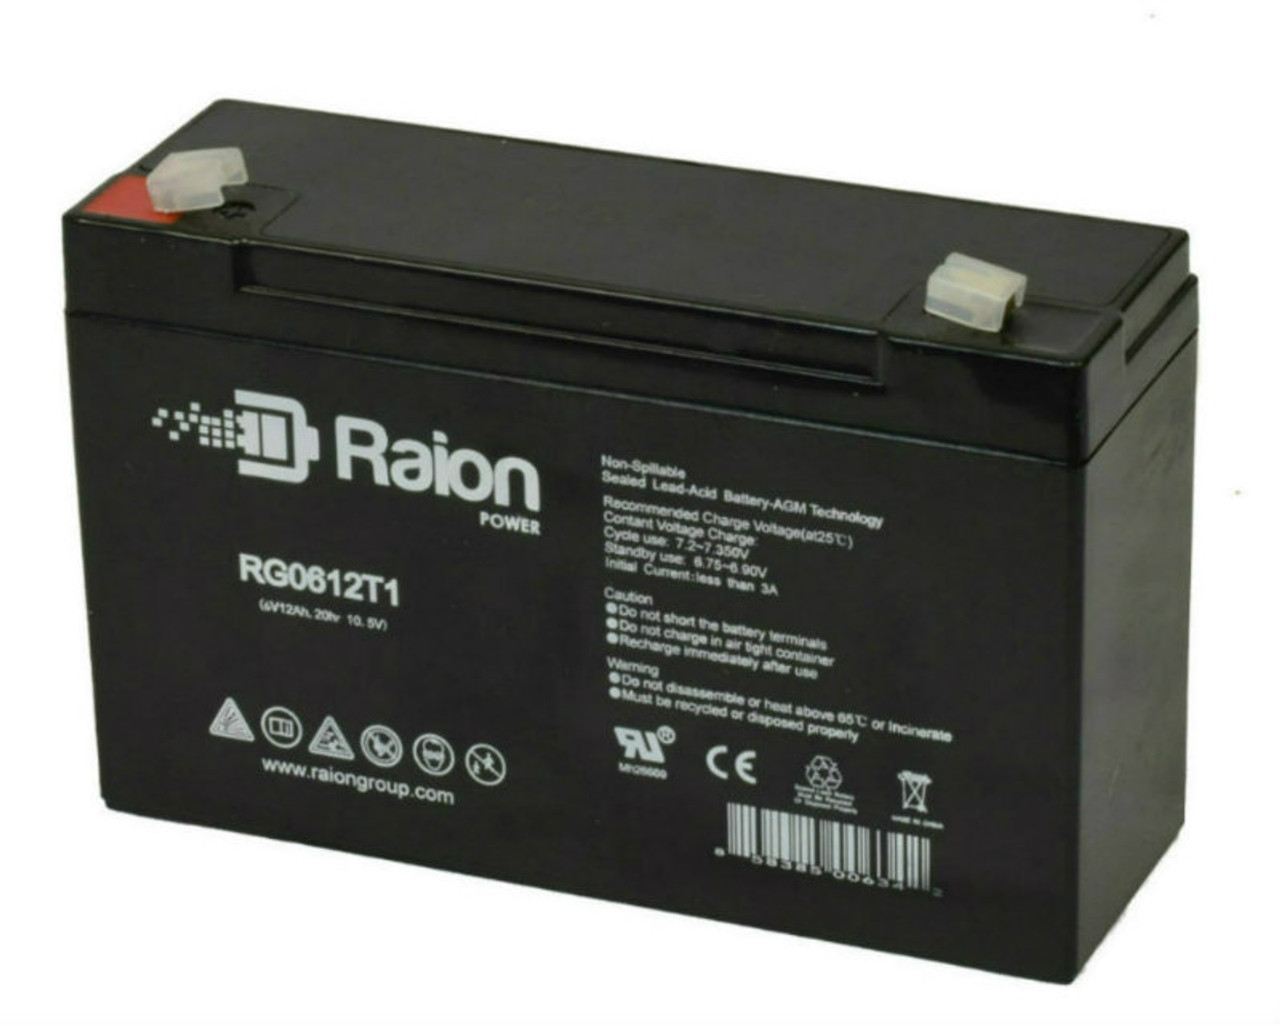 Raion Power RG06120T1 Replacement Battery for FirstPower FP6100